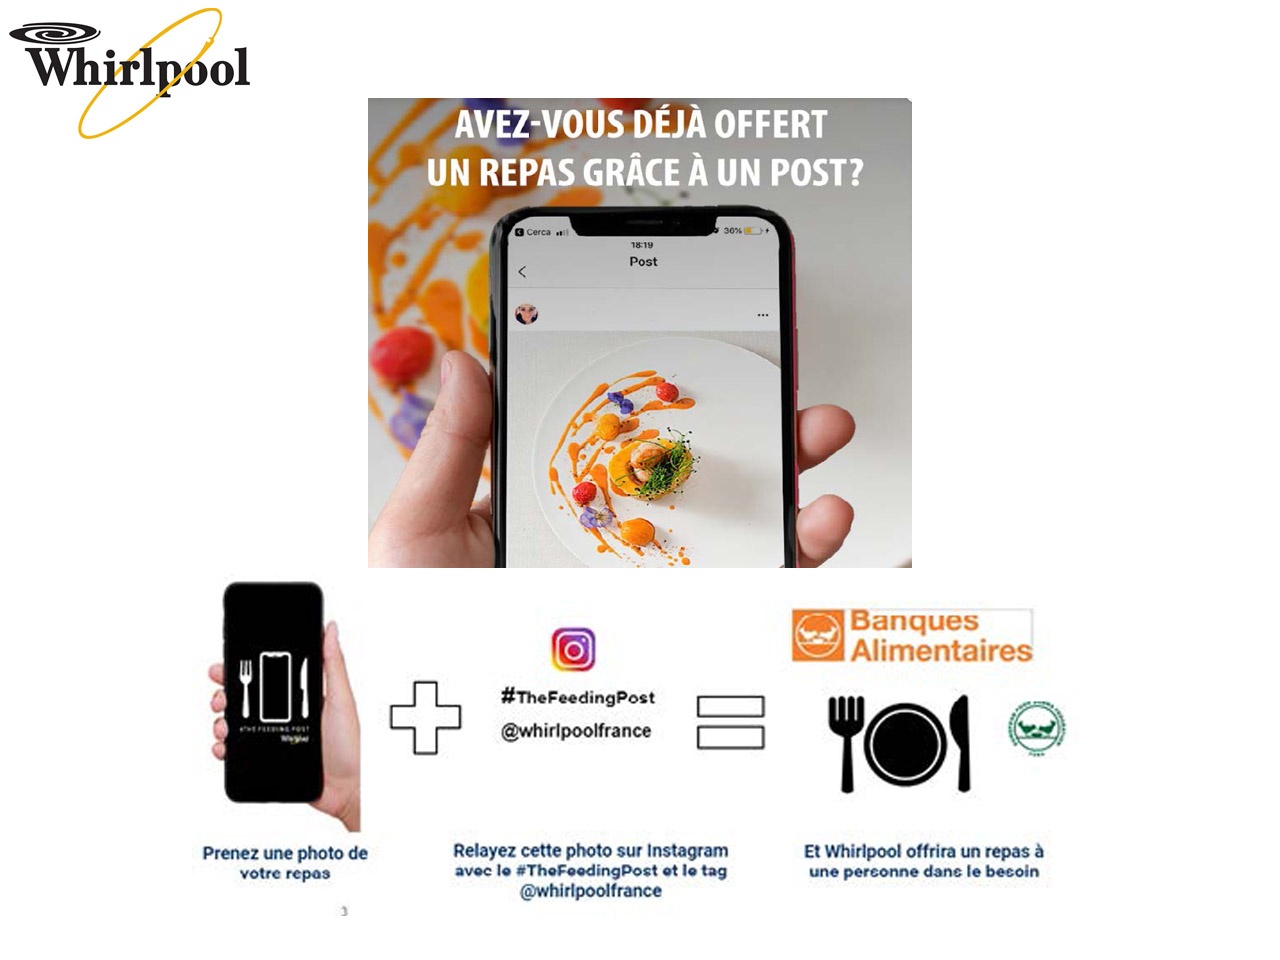 Whirlpool dévoile sa campagne solidaire #TheFeedingPost